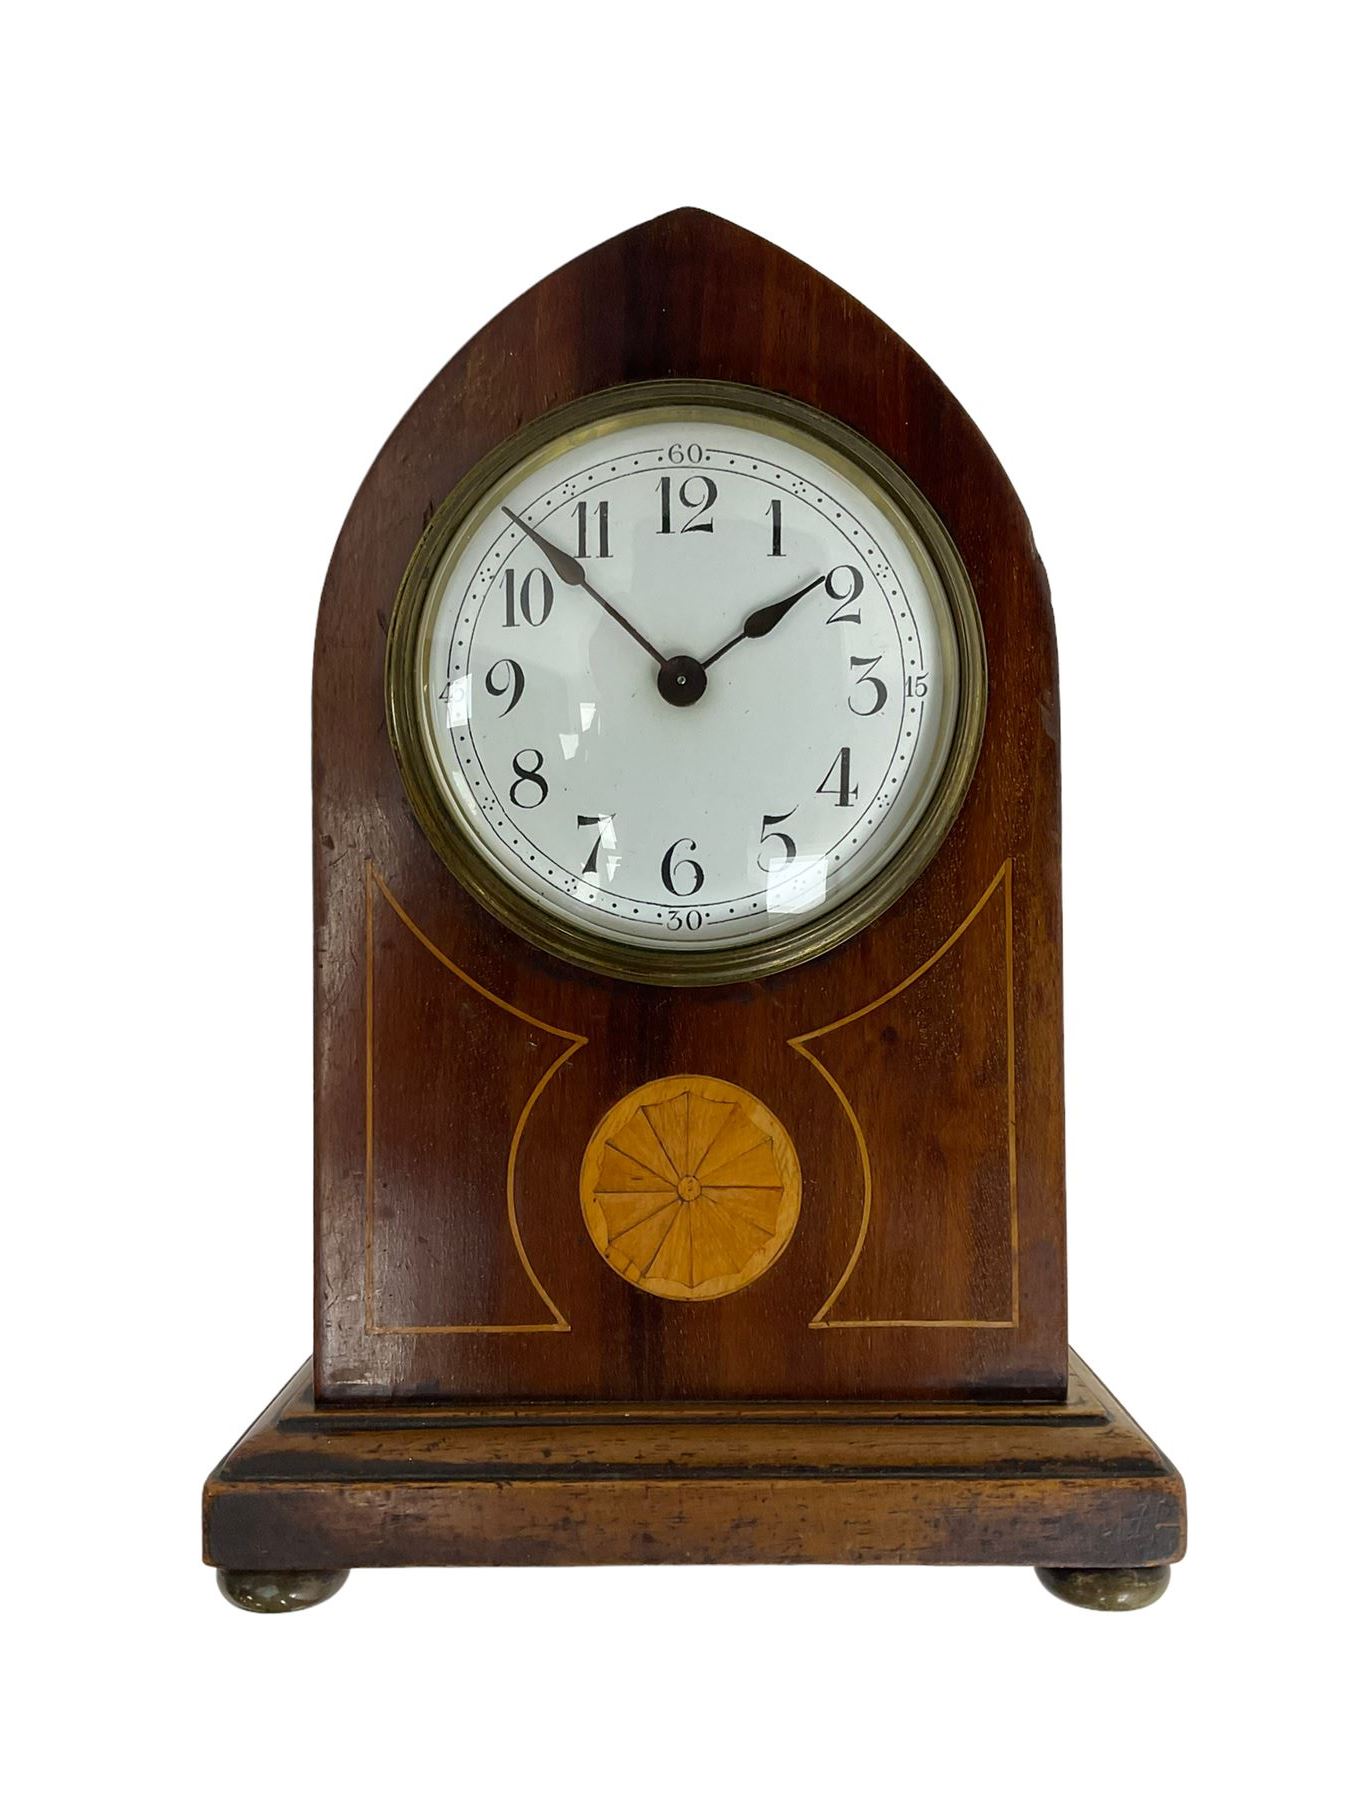 Mahogany cased Lancet clock c1910 with an inlaid cartouche and satinwood stringing